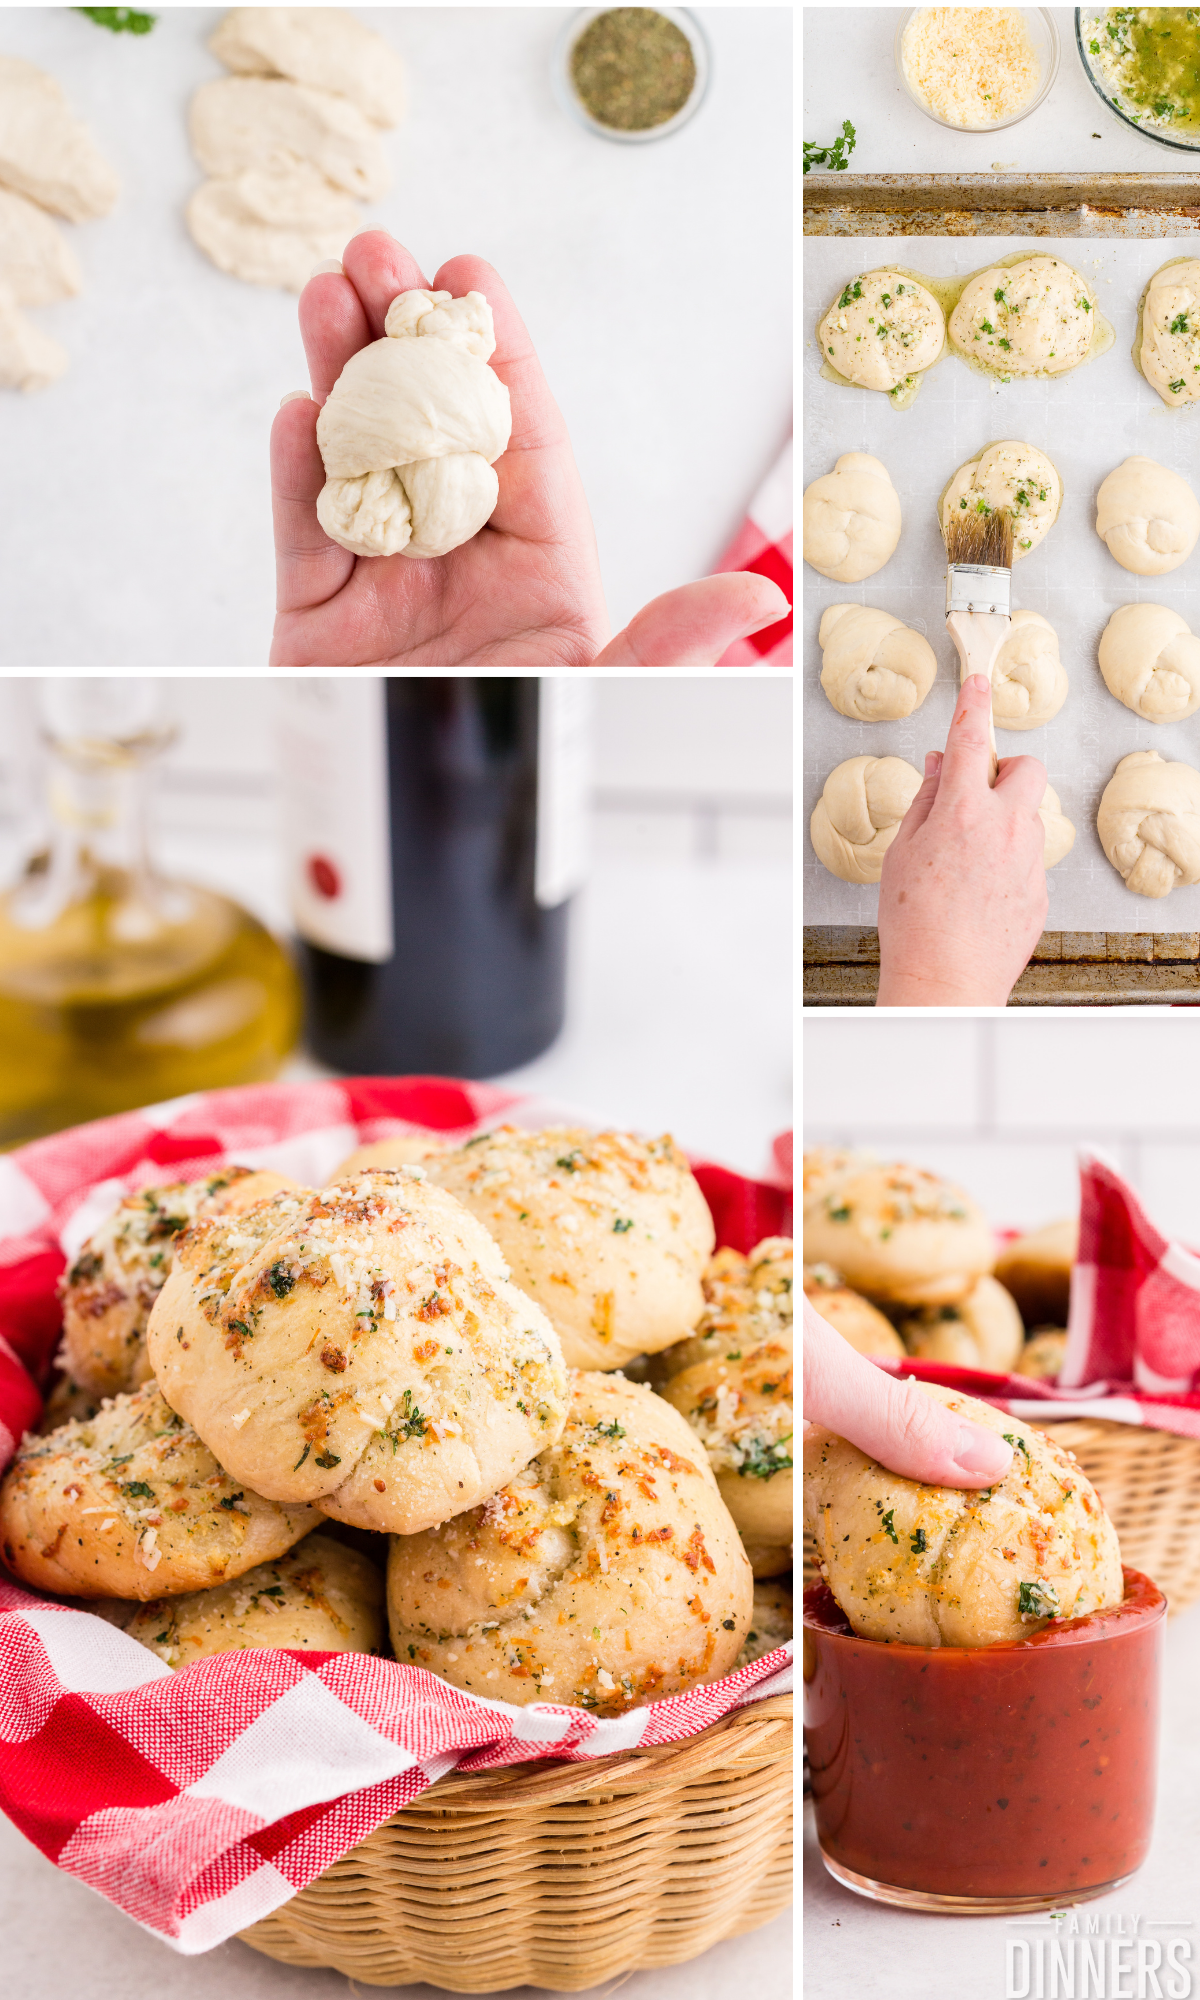 recipes with pizza dough collage - top left - hand holding tied garlic knot - top right: hand brushing butter onto garlic knots - bottom left: basket of garlic knots - bottom right: hand holding garlic knot dipping into marinara sauce - easy garlic knots recipe